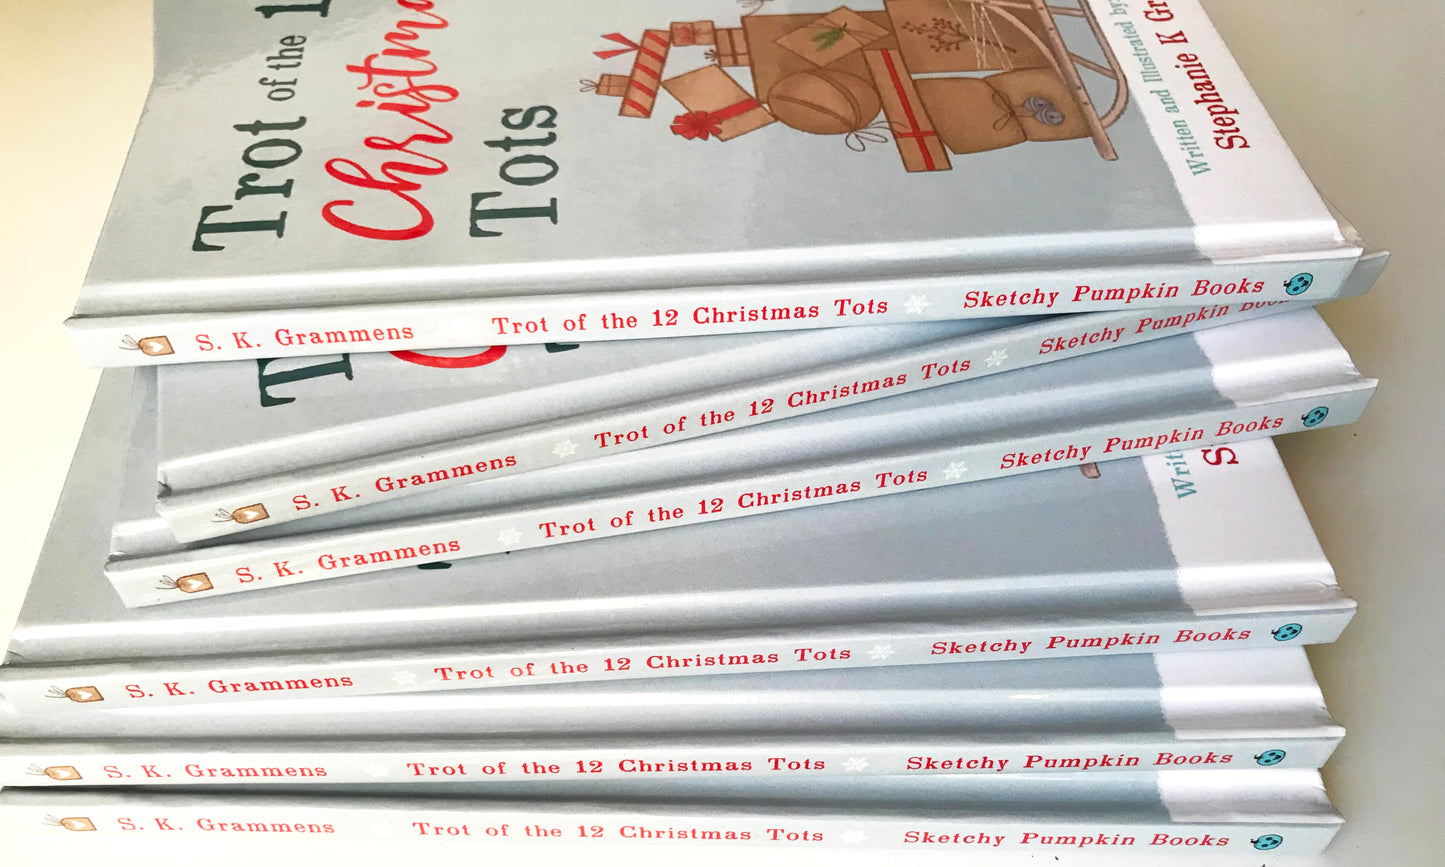 Trot of the 12 Christmas Tots, Book with Stickers